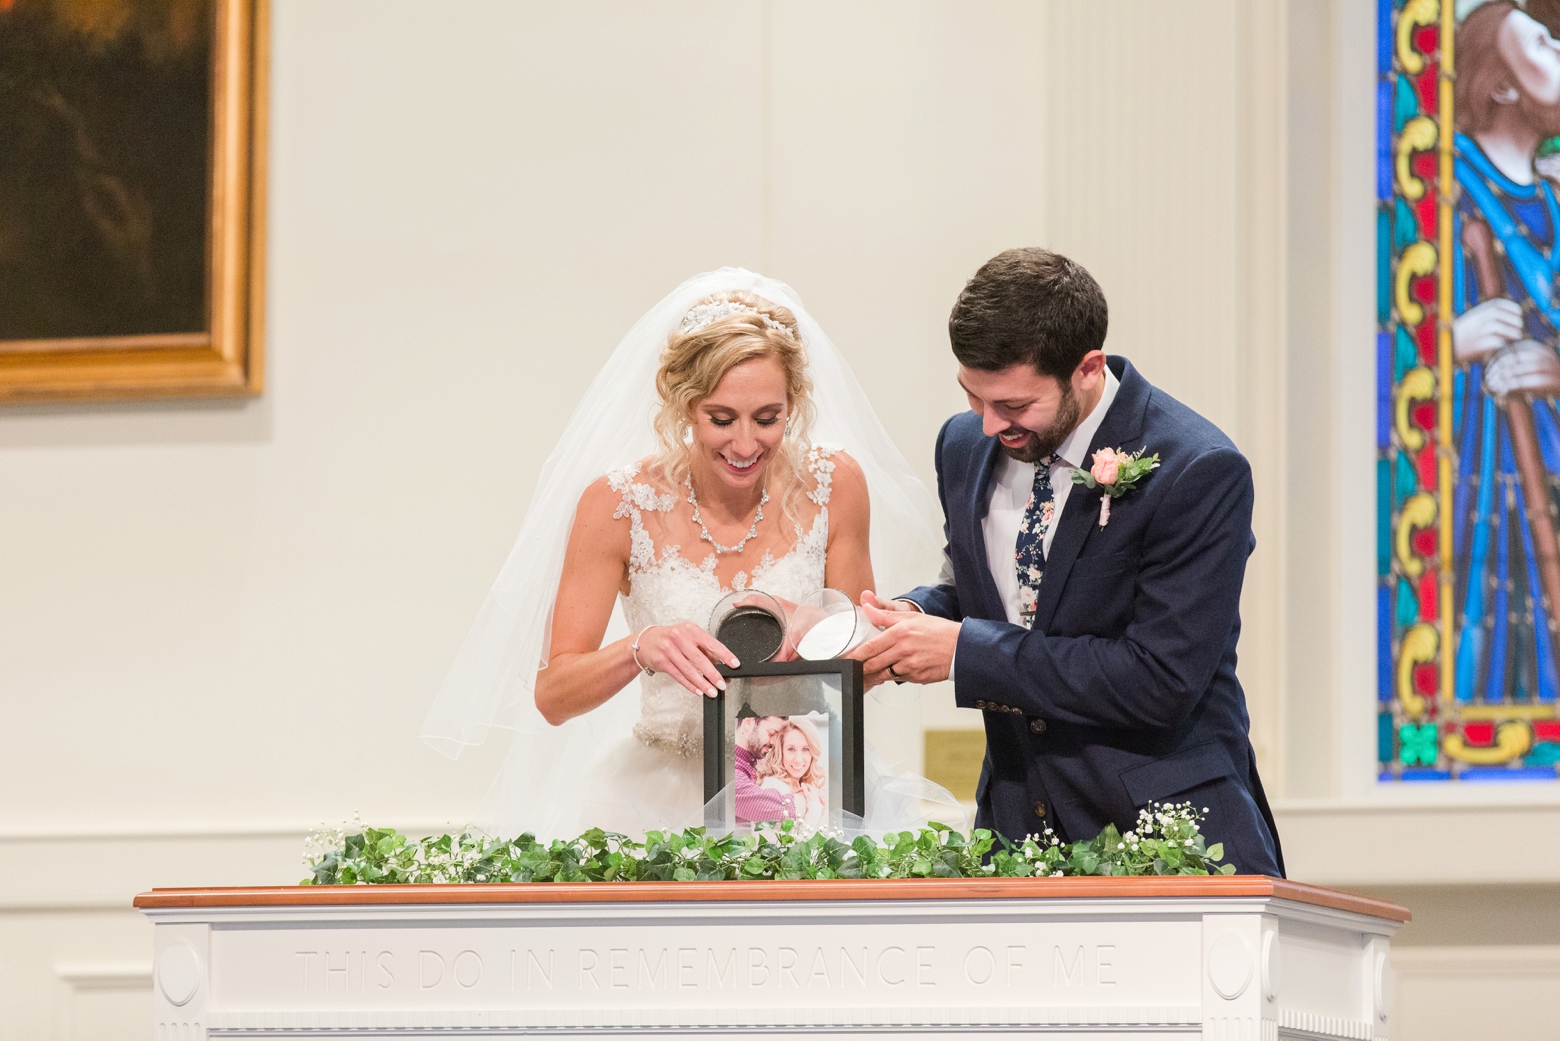 Regent University Chapel and Virginia Museum of Contemporary Art Wedding by Angie McPherson Photography